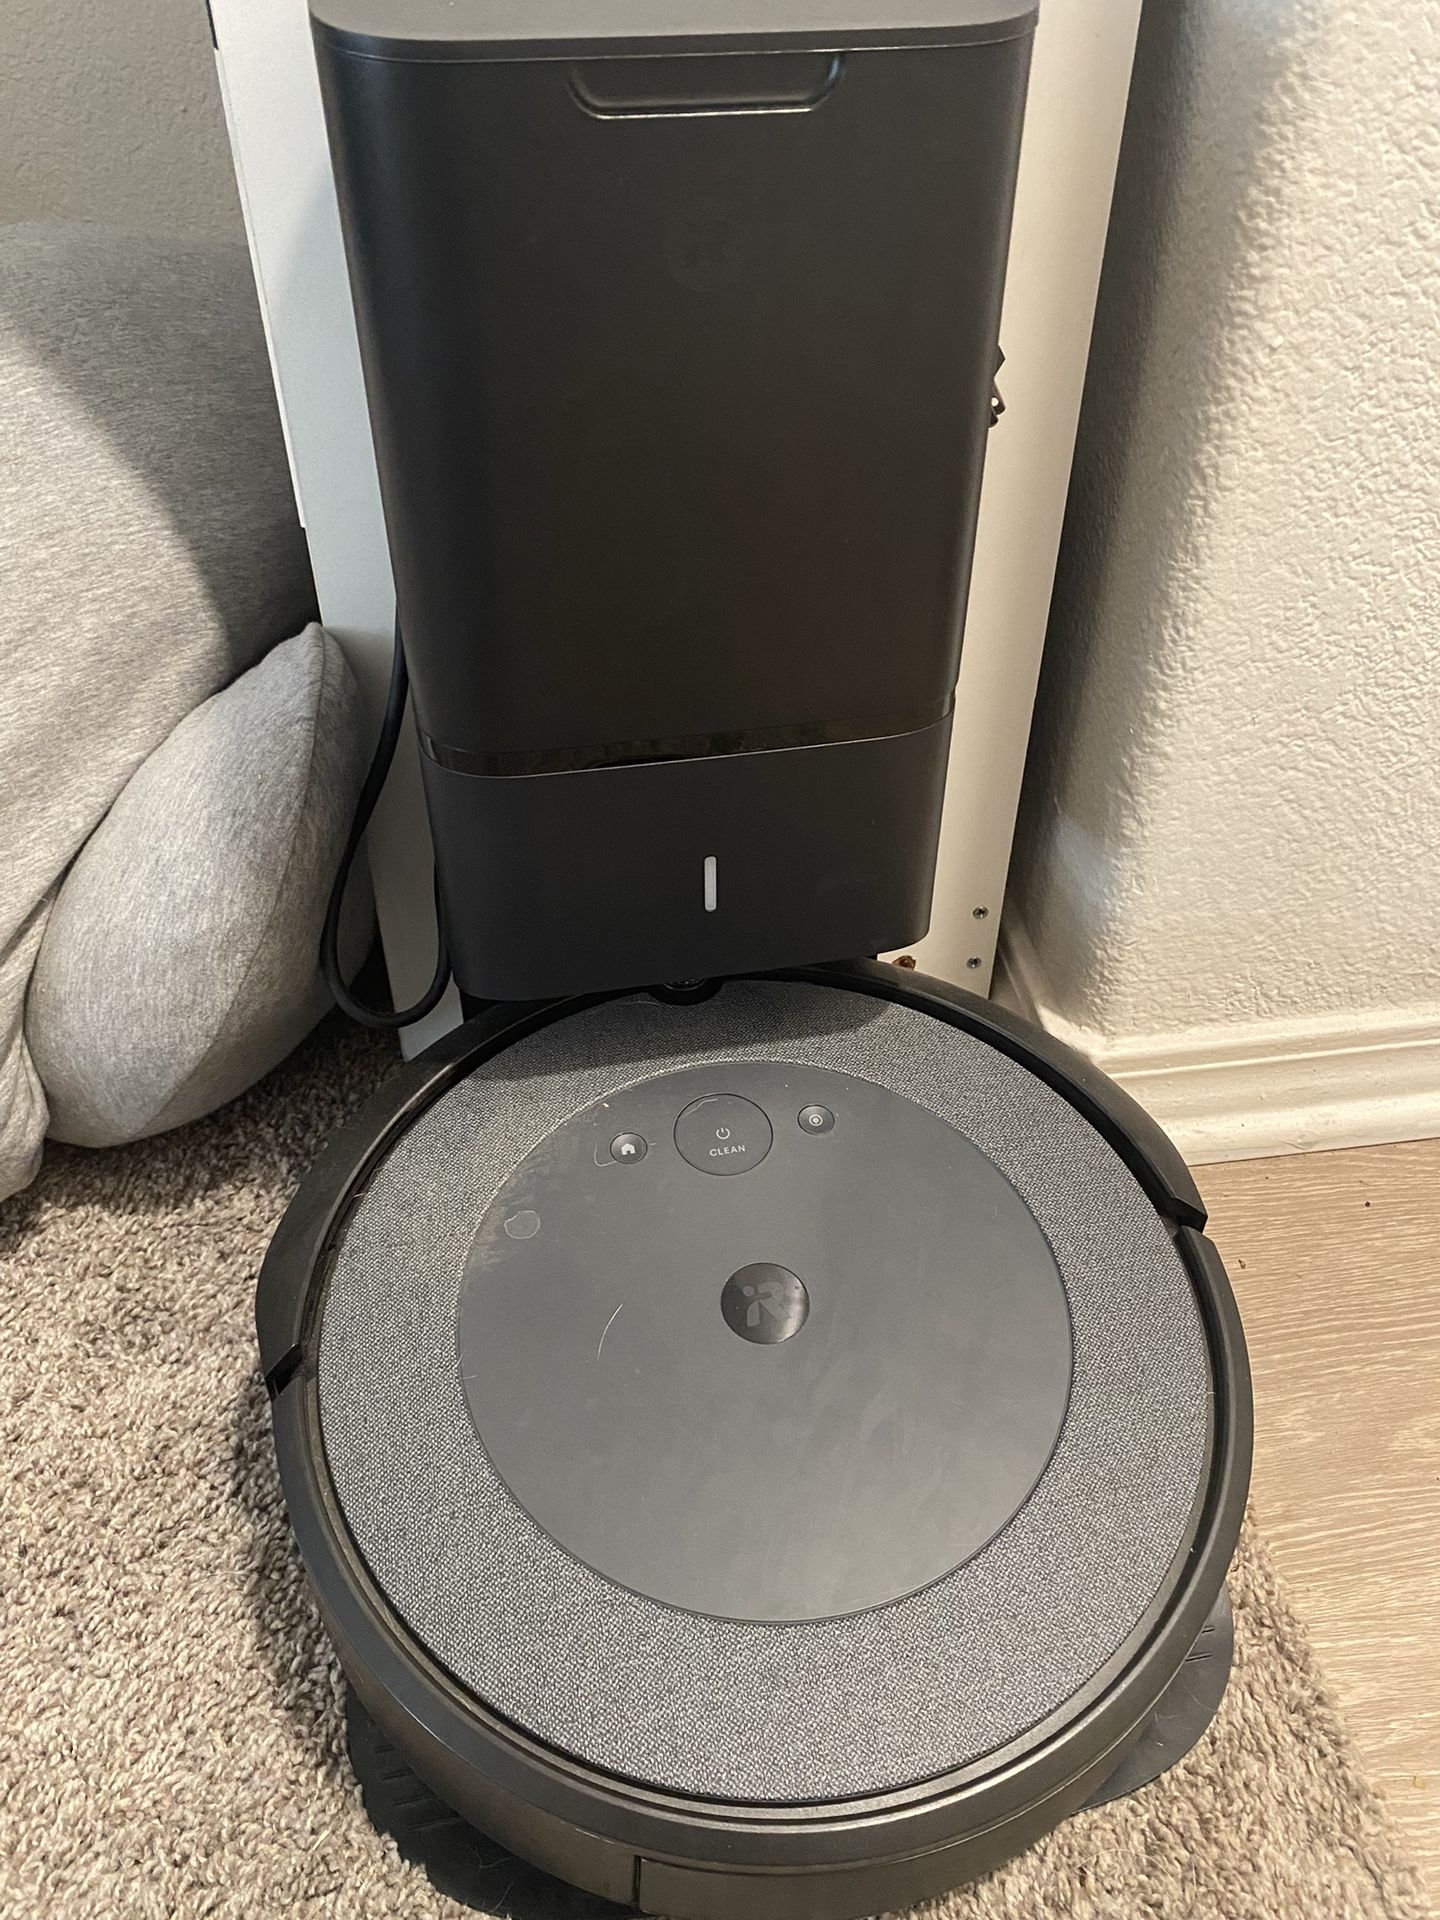 Roomba For Sale (Excellent Working Condition)